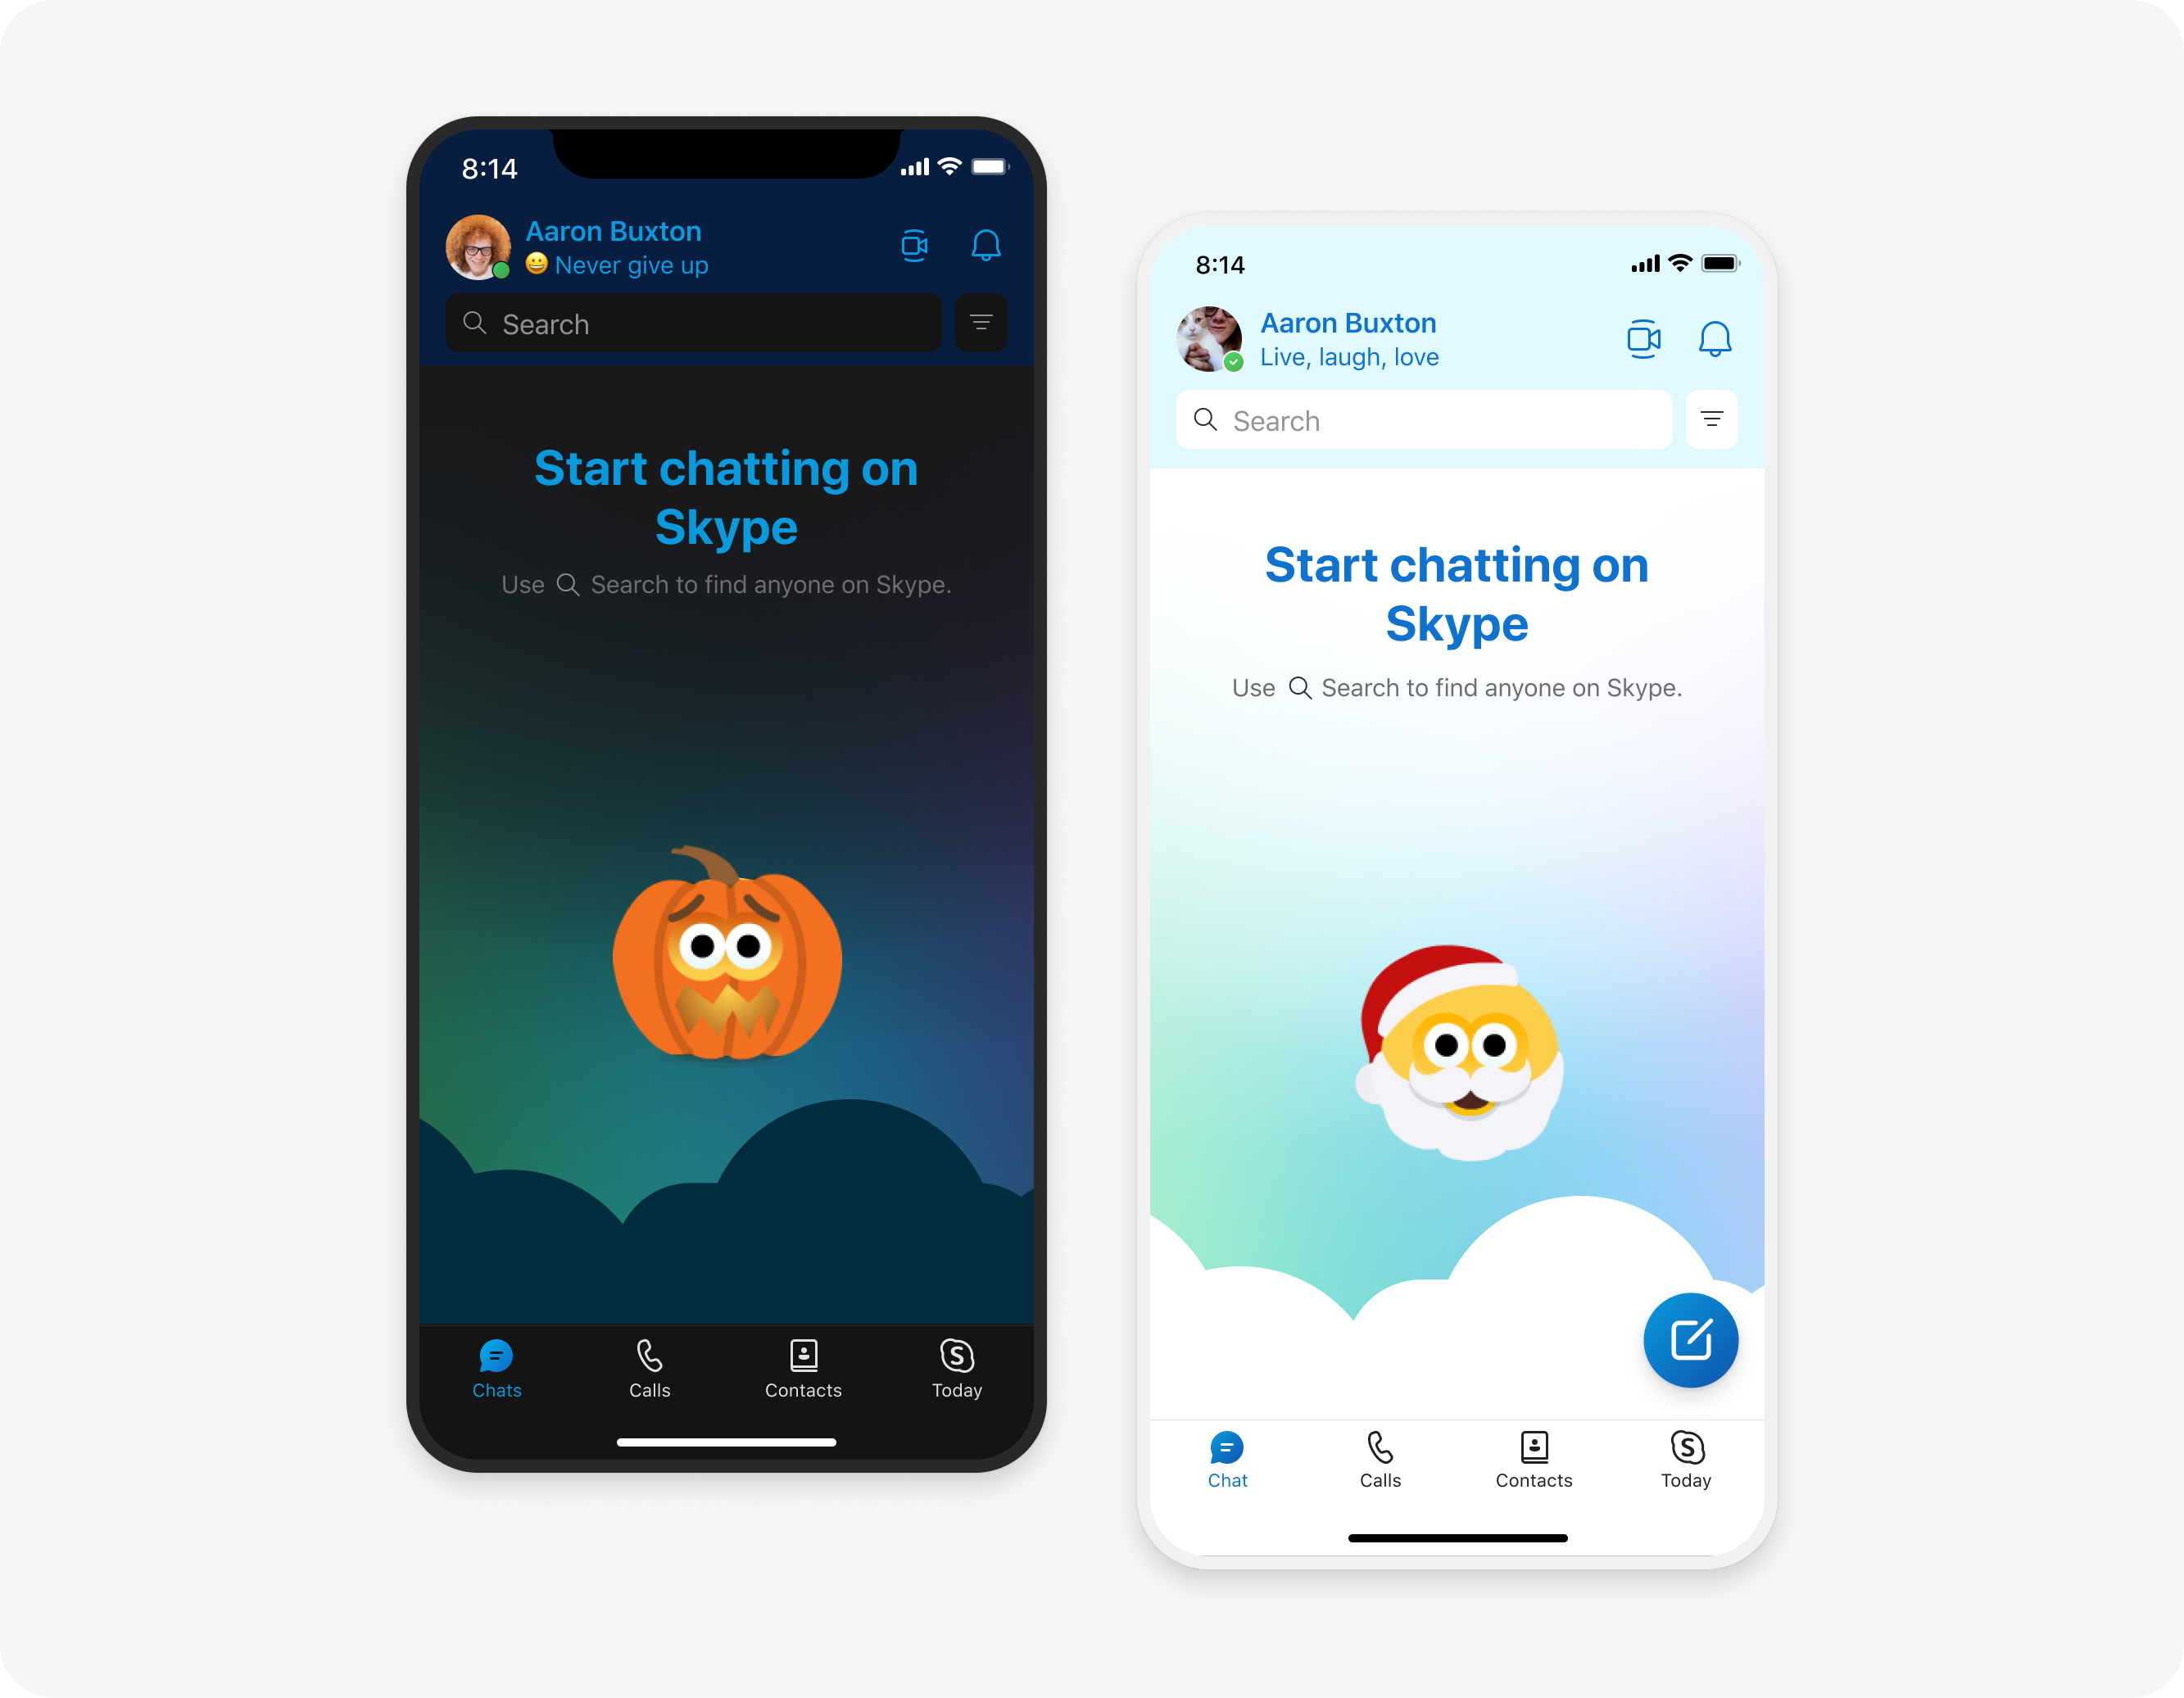 Skype has updated its visuals with new illustrations featuring signature clouds and classic emoticons, as well as more colorful themes with colored headers and message bubbles for a personalized touch. These changes were made for a more modern and delightful user experience.